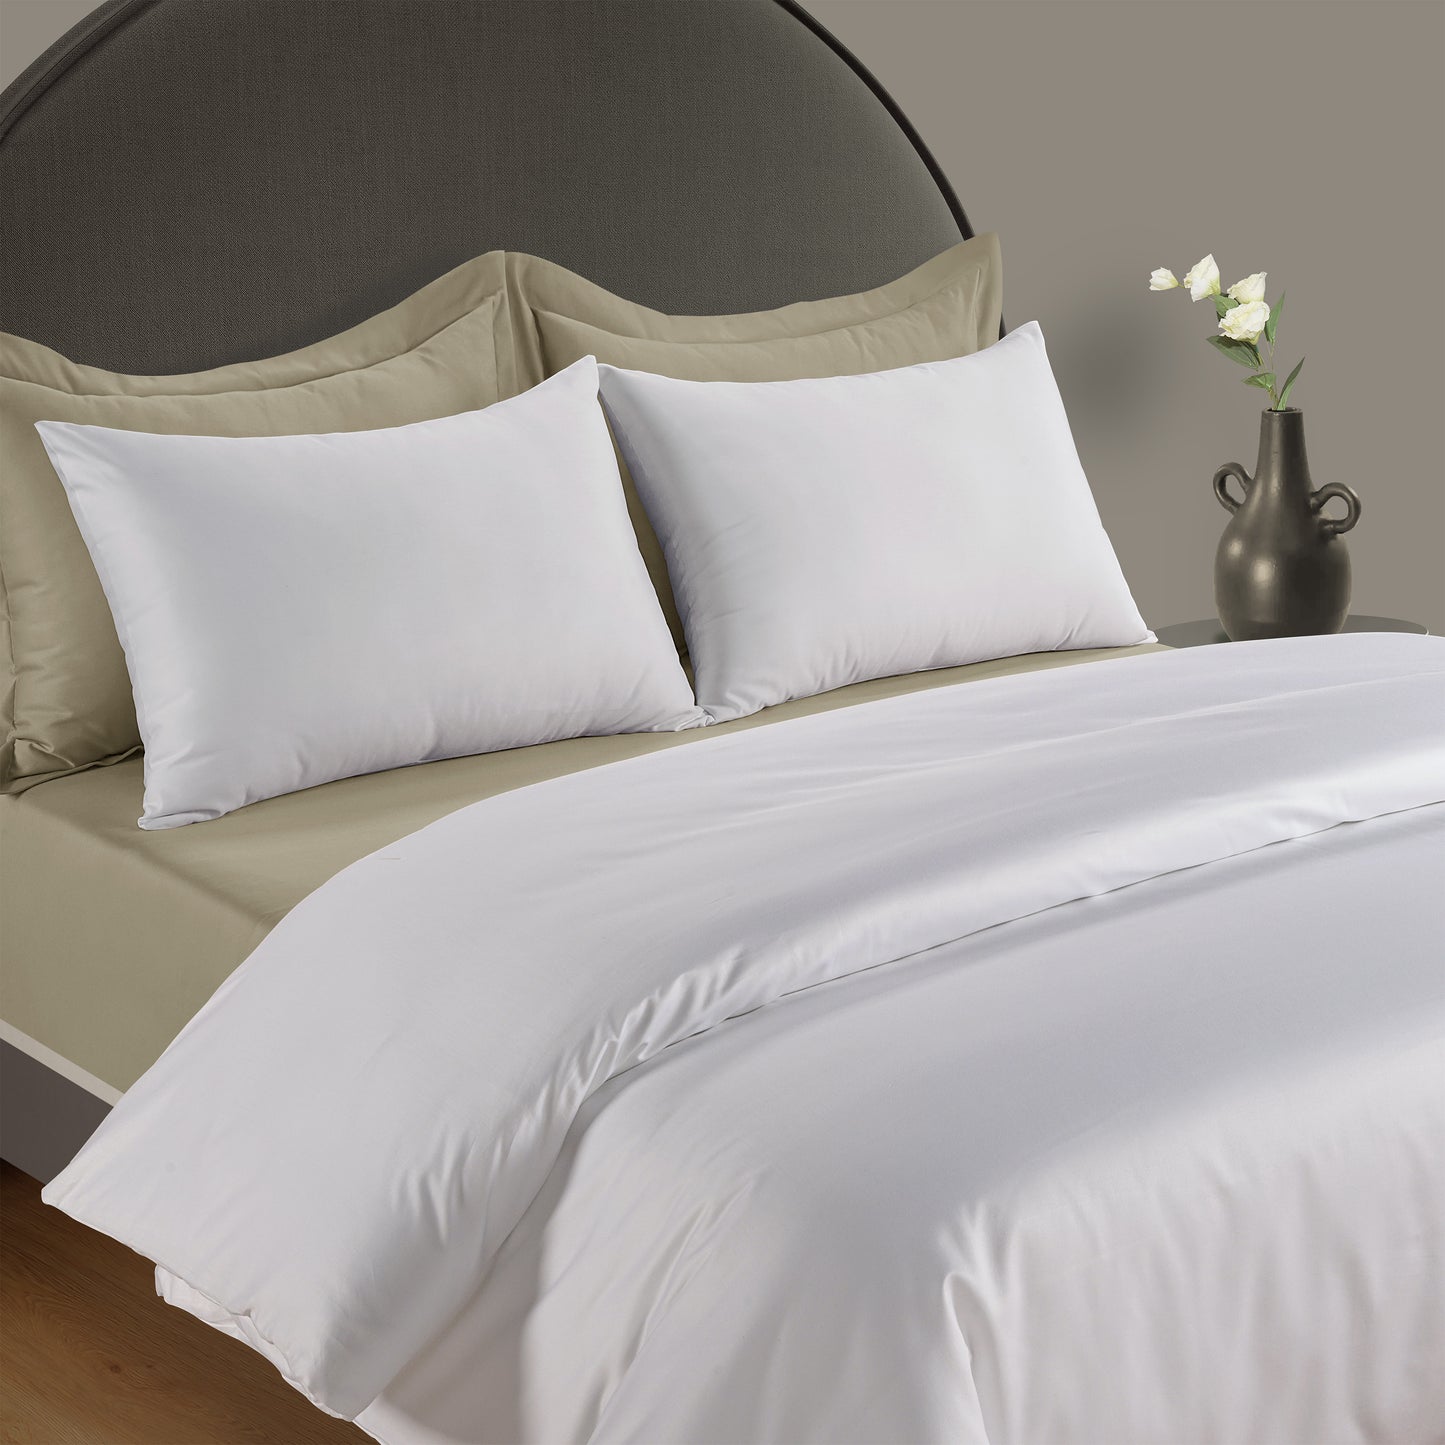 300 Thread Count Peaceful Empress - White with Oyster Mushroom Set